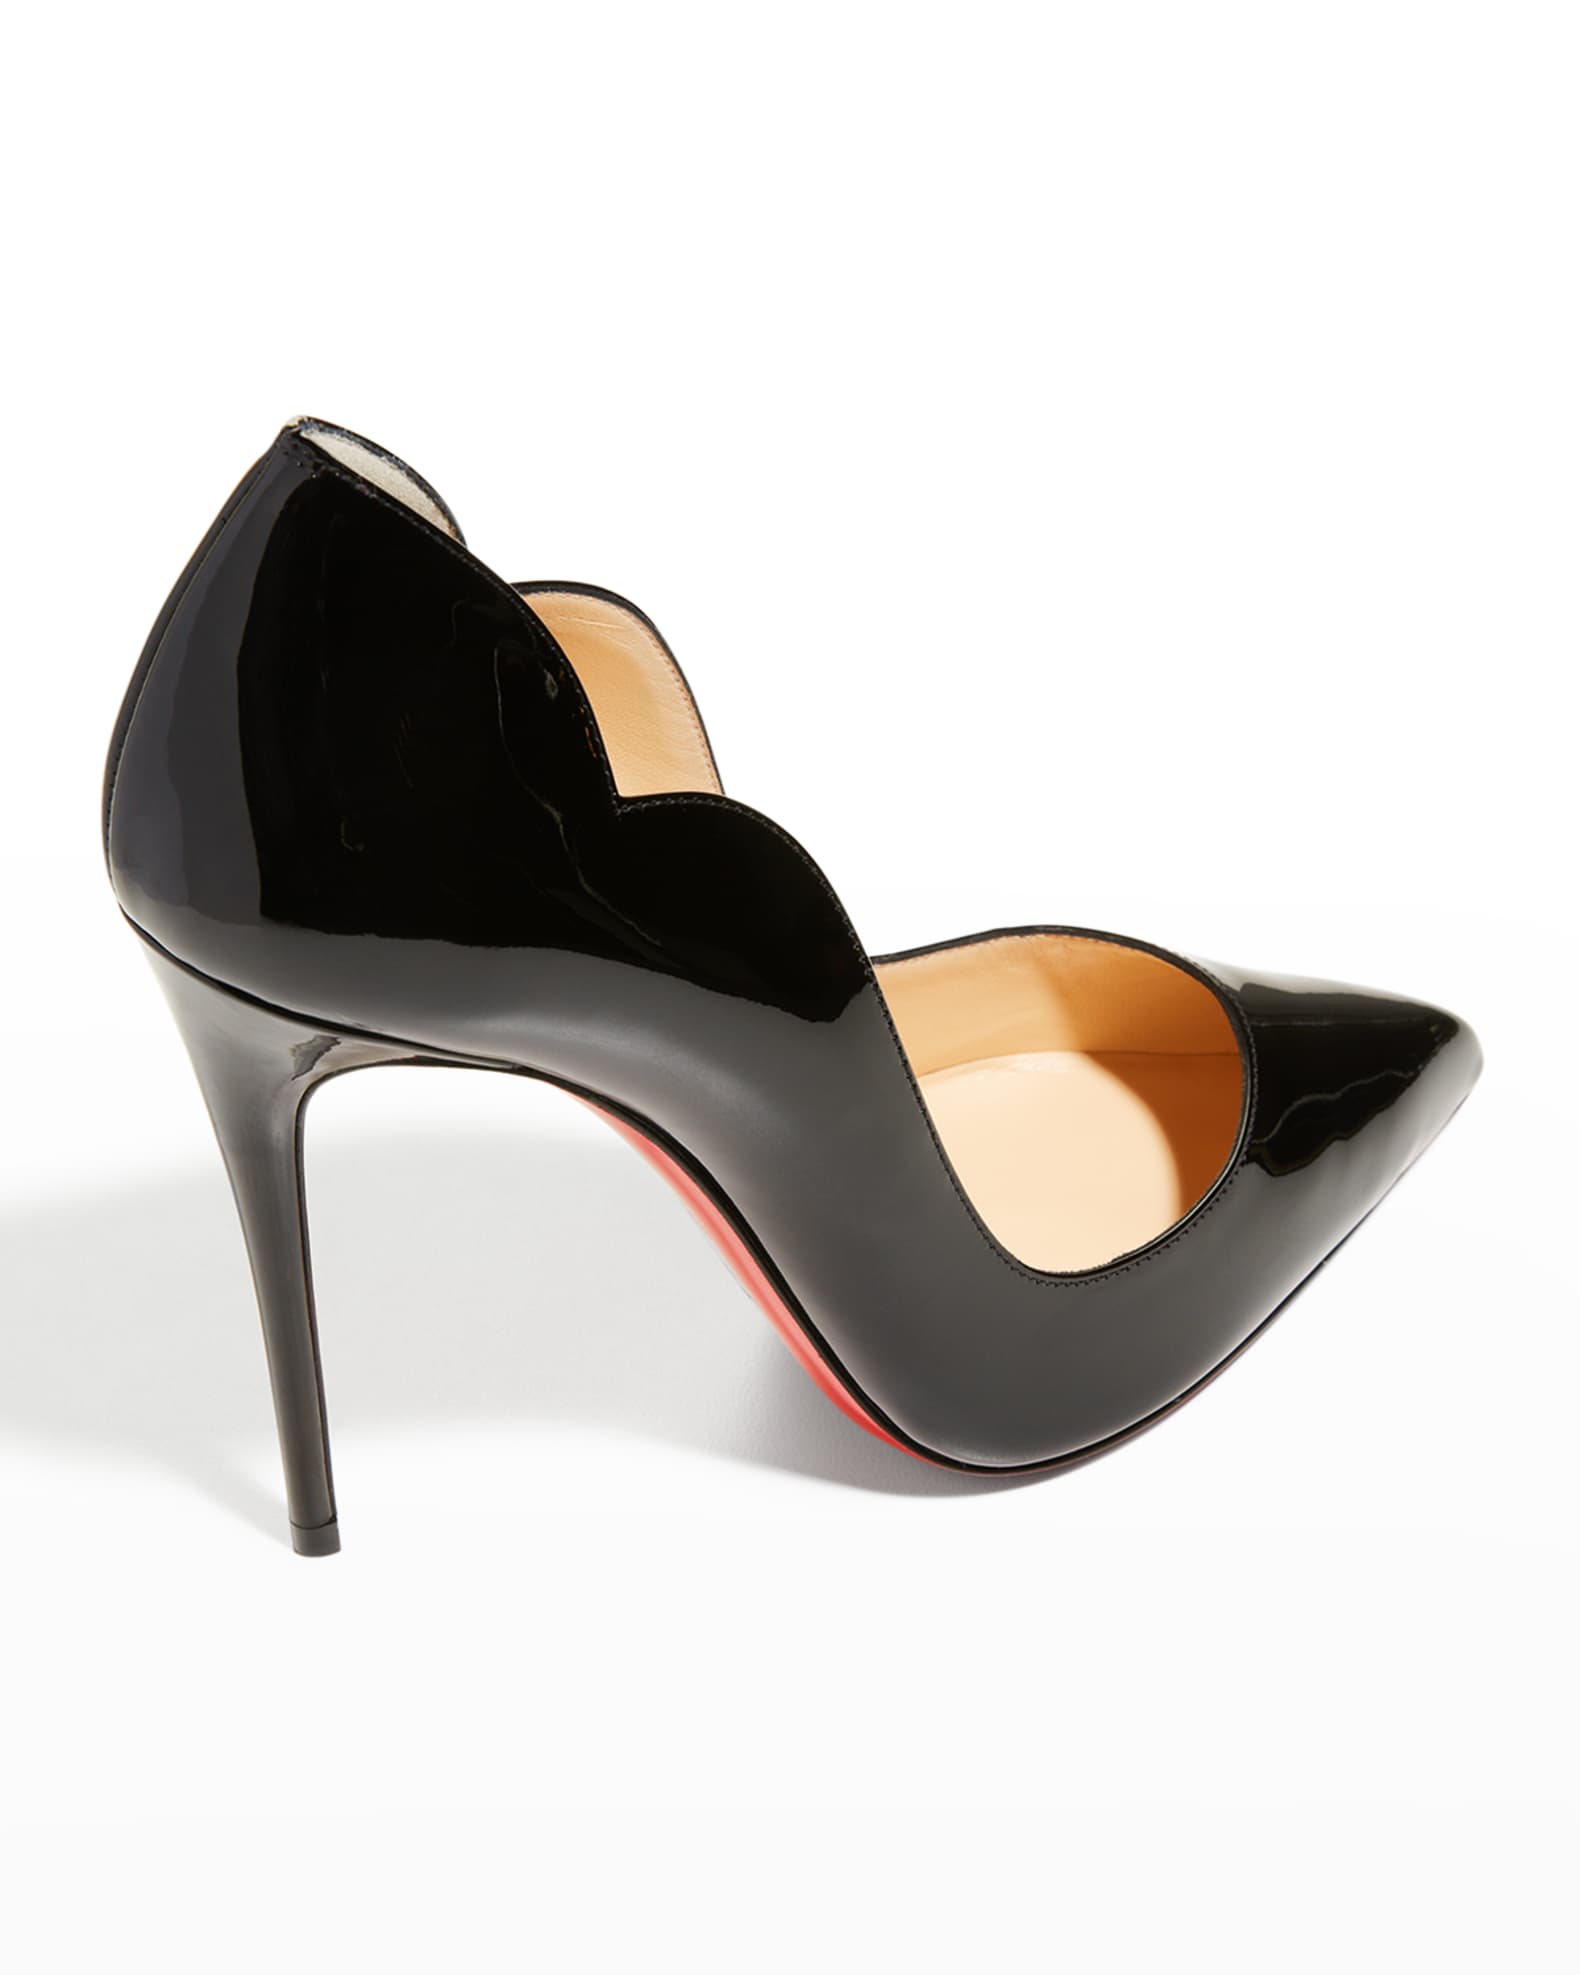 Christian Louboutin Hot Chick Plume Suede Pumps 100